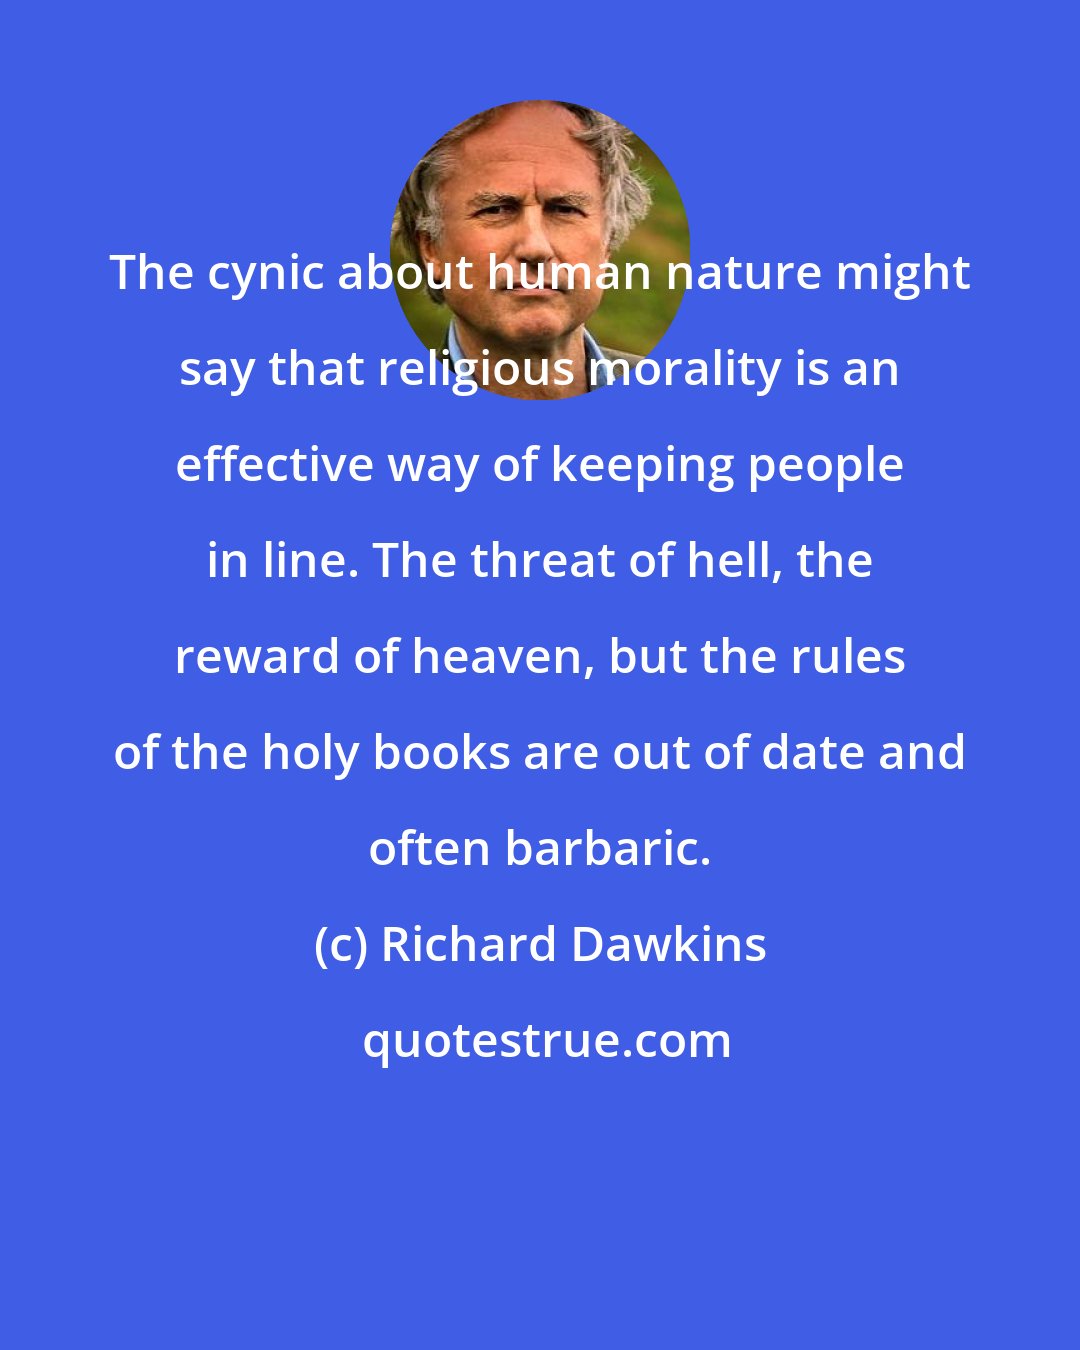 Richard Dawkins: The cynic about human nature might say that religious morality is an effective way of keeping people in line. The threat of hell, the reward of heaven, but the rules of the holy books are out of date and often barbaric.